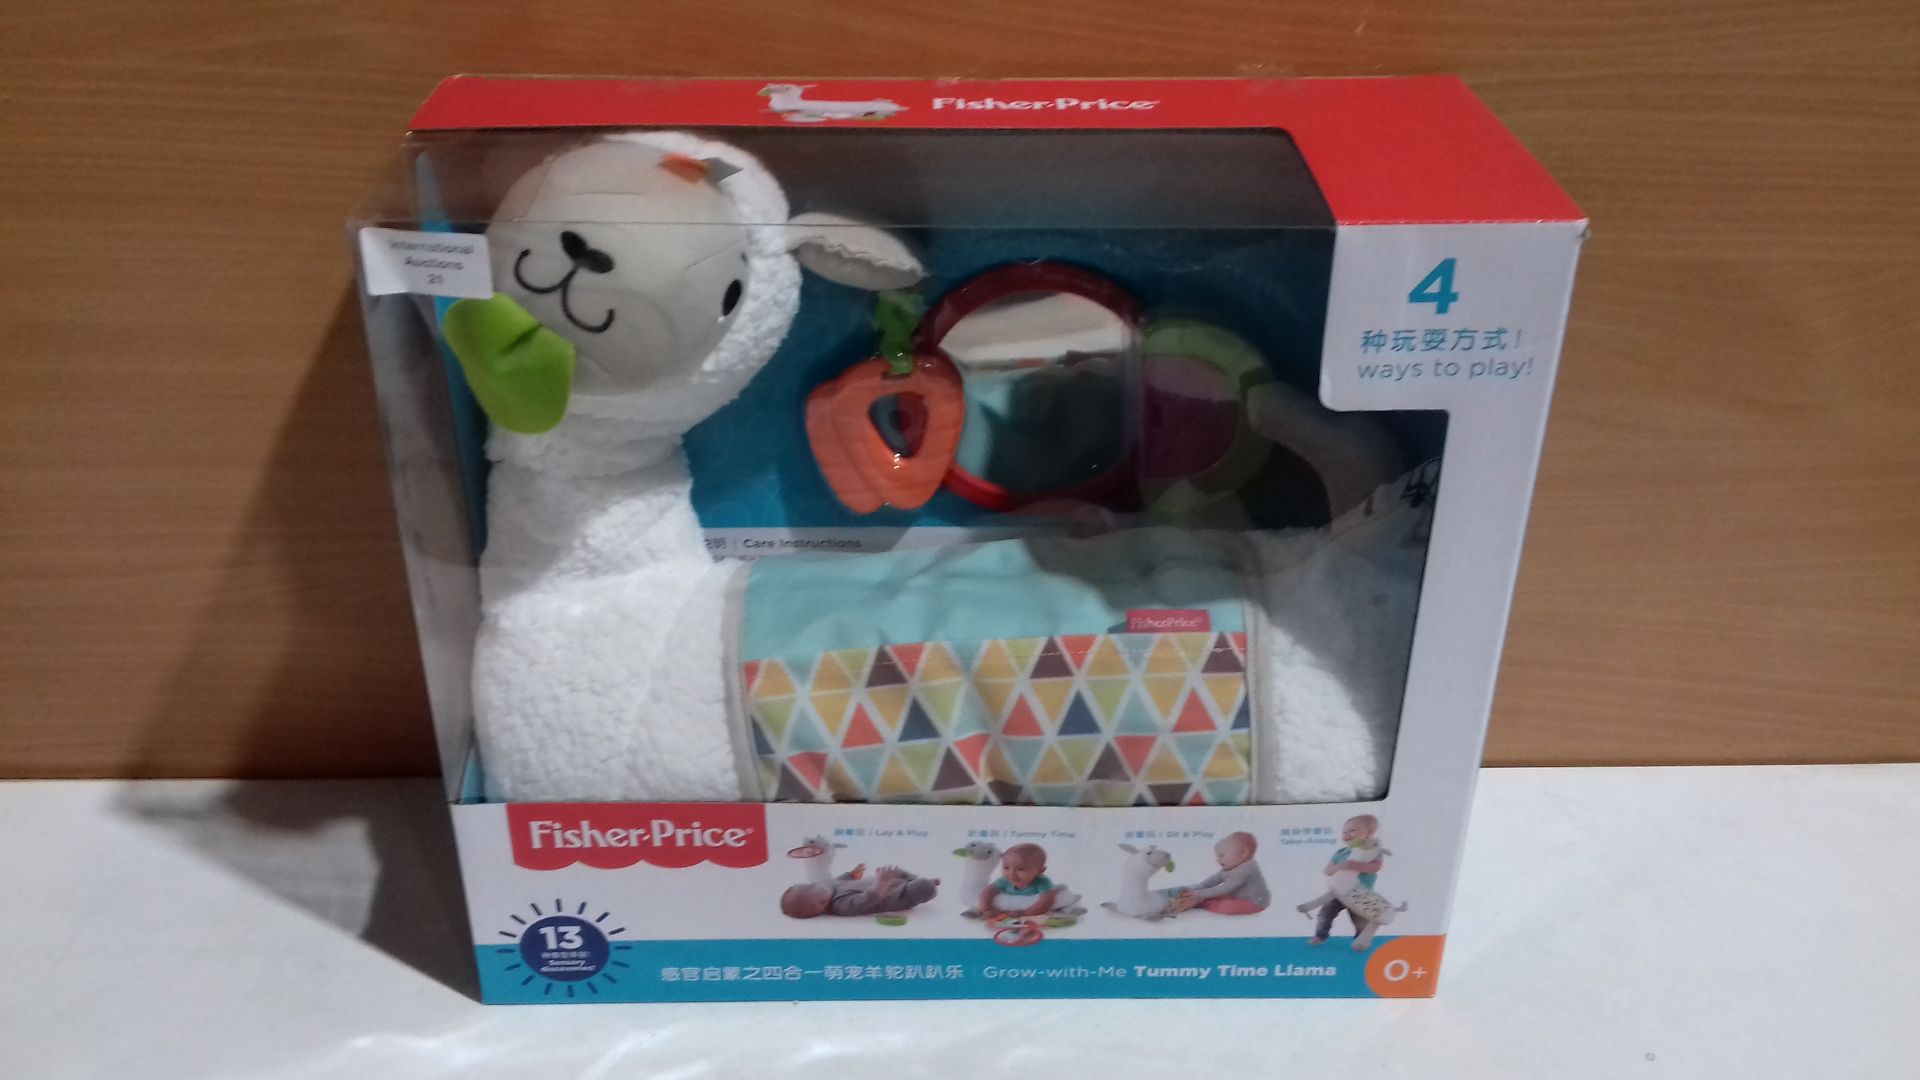 RRP £27.80 Fisher-Price Grow-with-Me Tummy Time Llama - Image 2 of 2